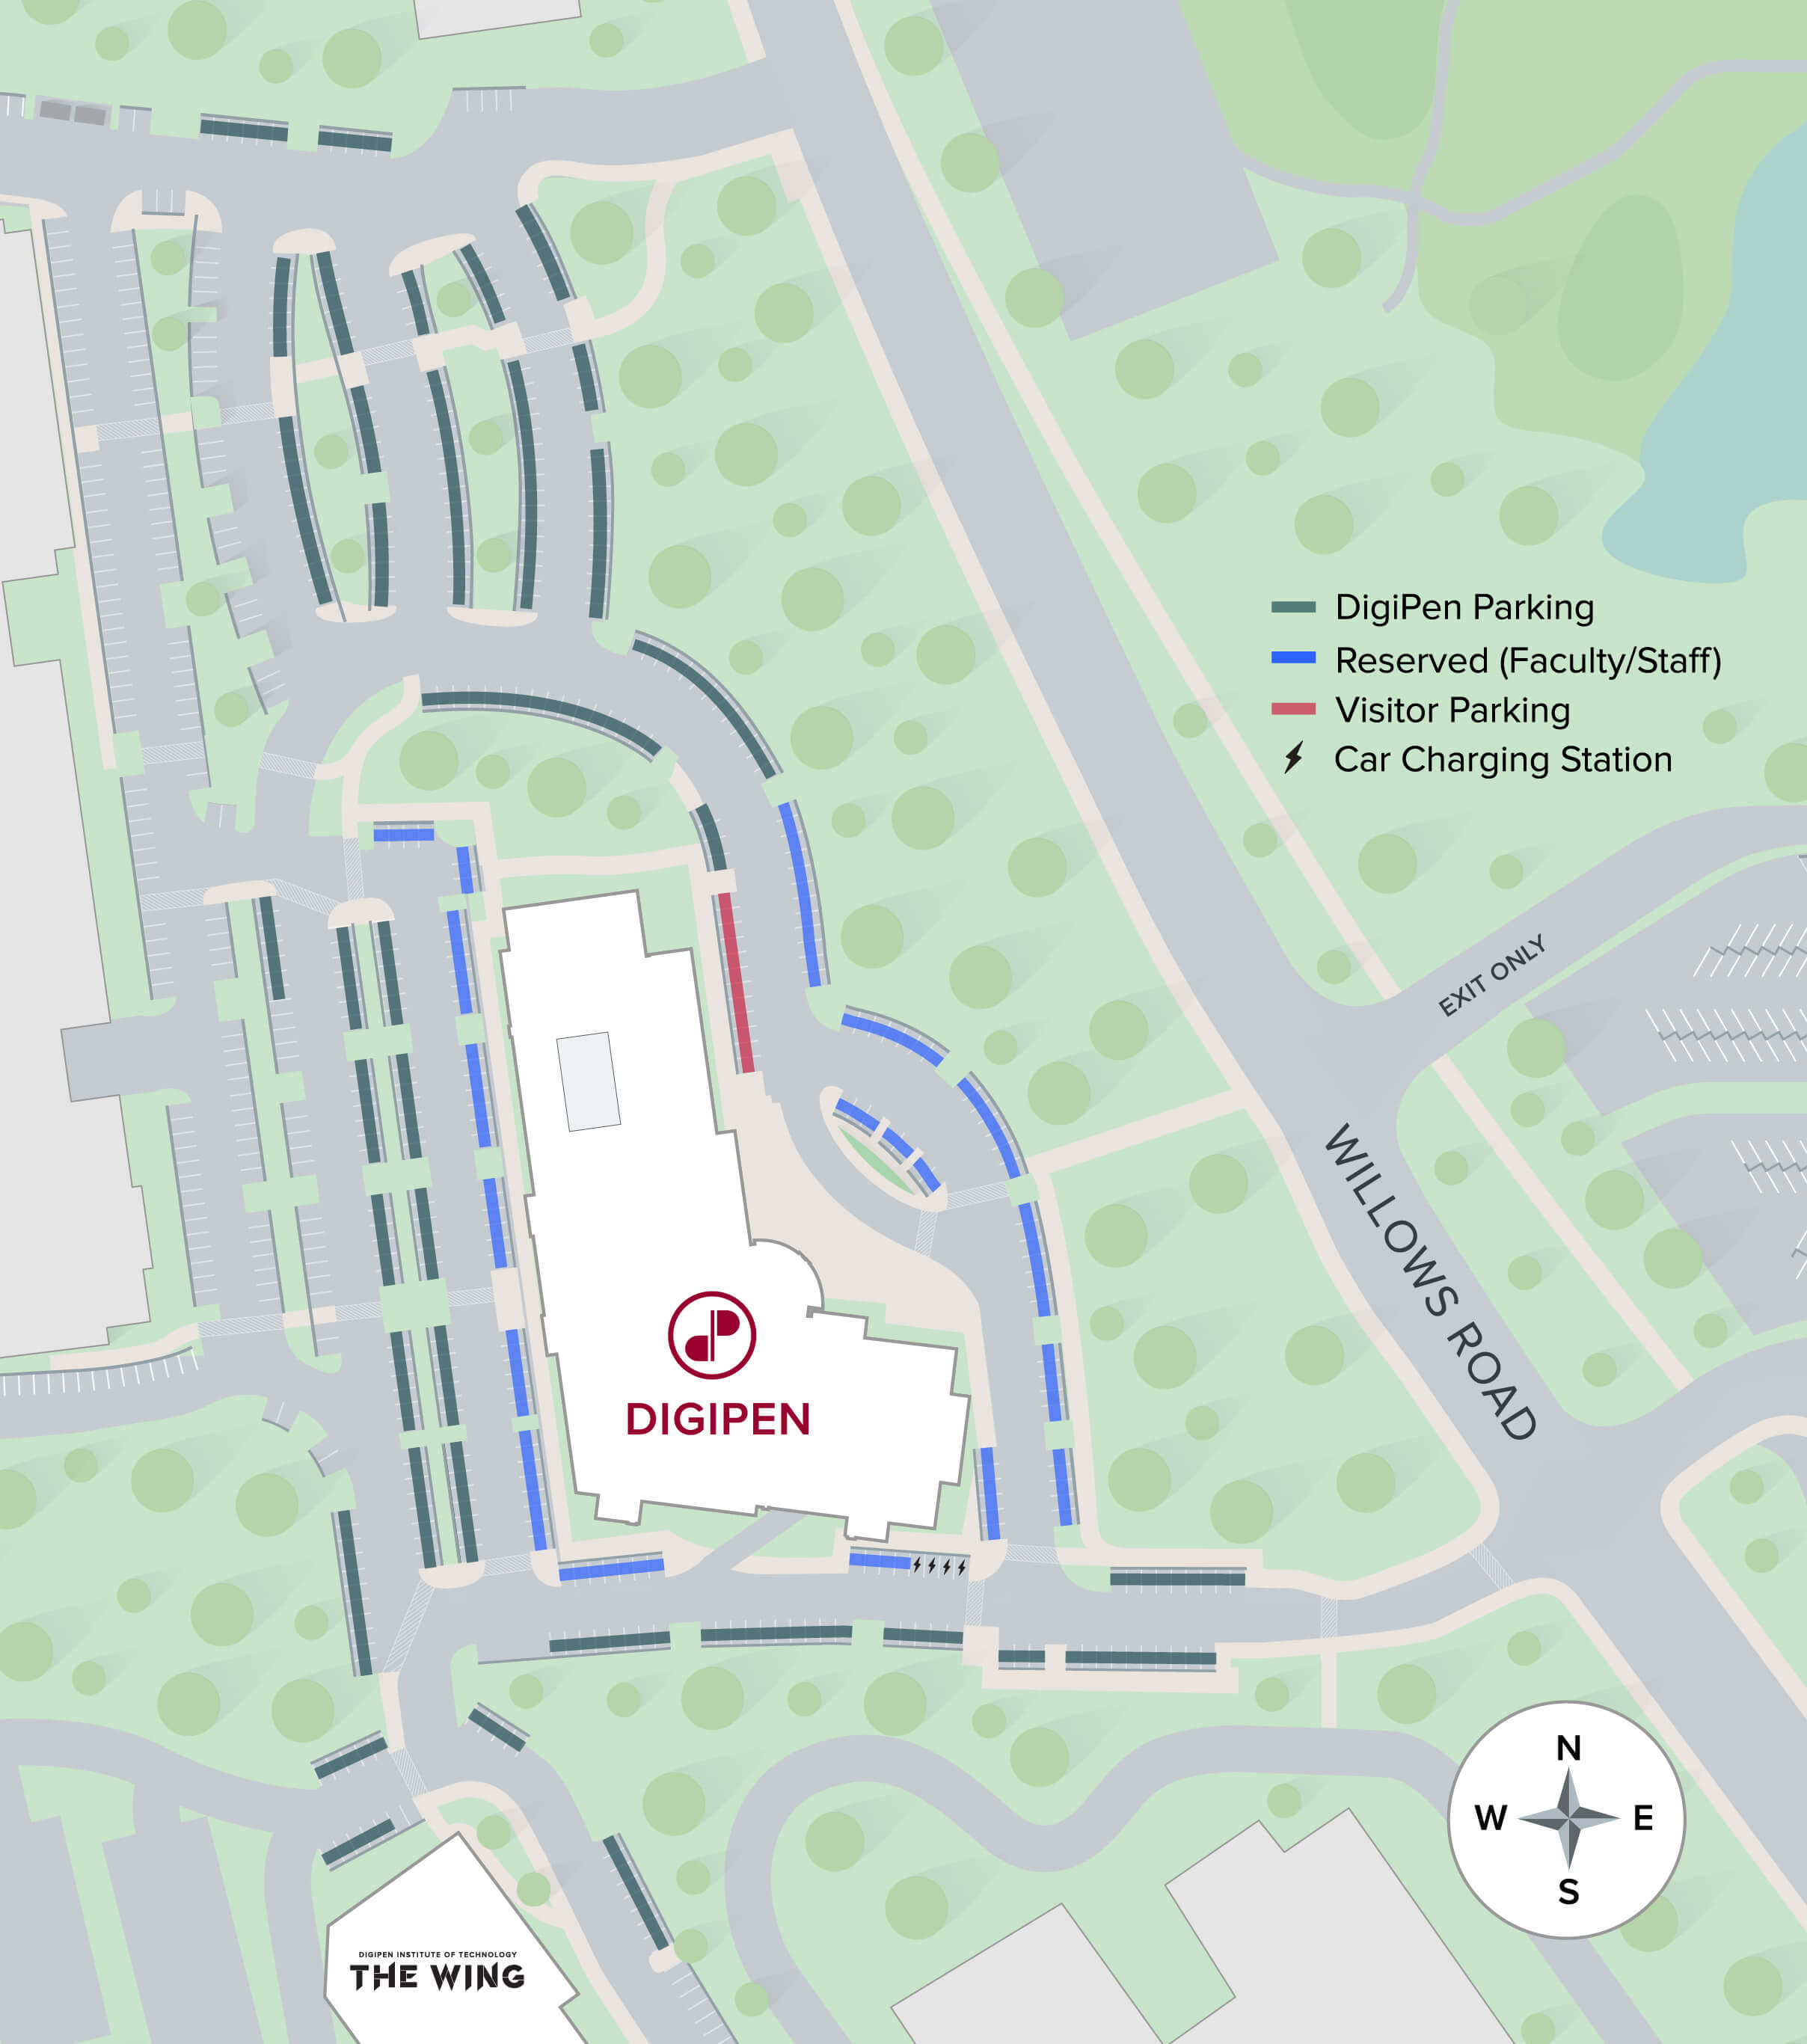 Map of DigiPen parking area